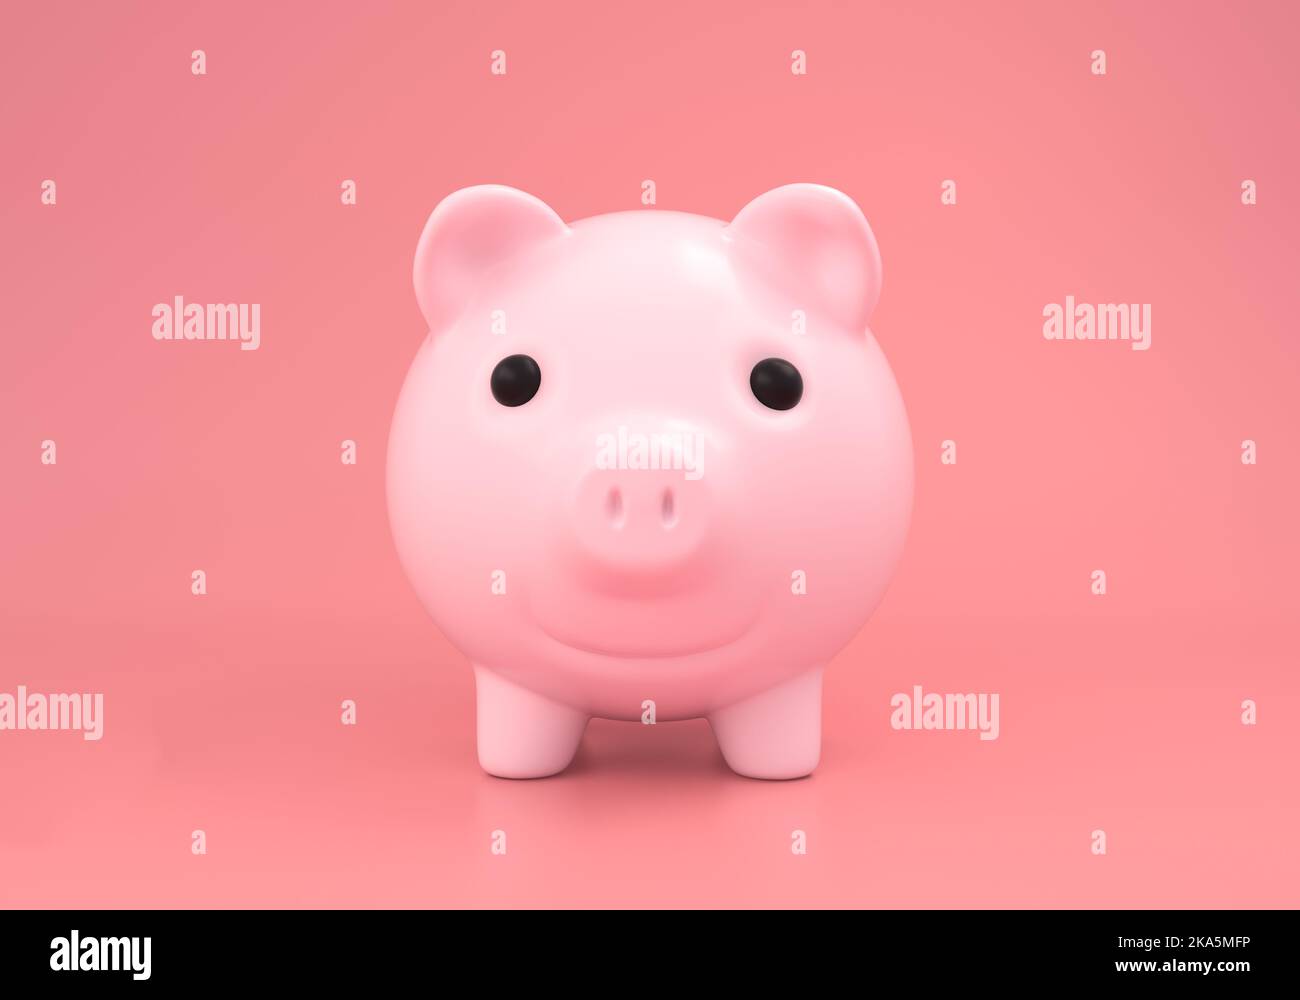 Pig bank smiling on pink background. money savings concept. 3d rendering. Stock Photo